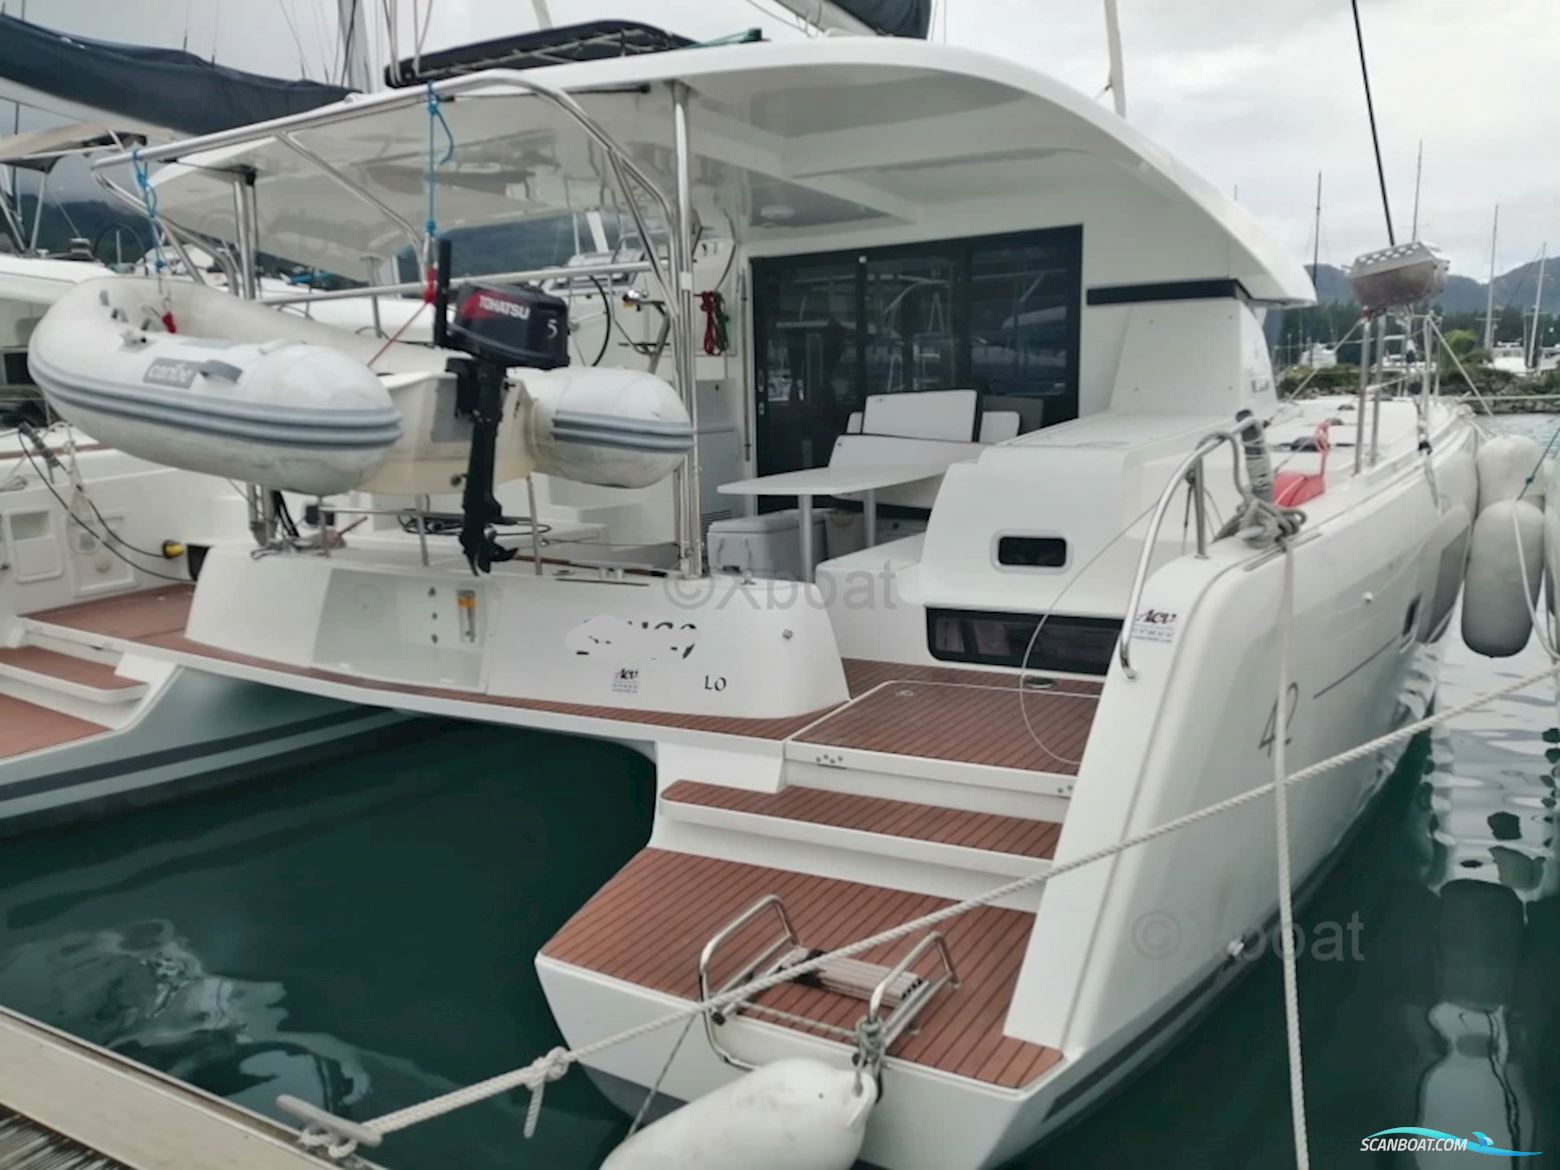 Lagoon 42 Multi hull boat 2016, with Yanmar engine, No country info